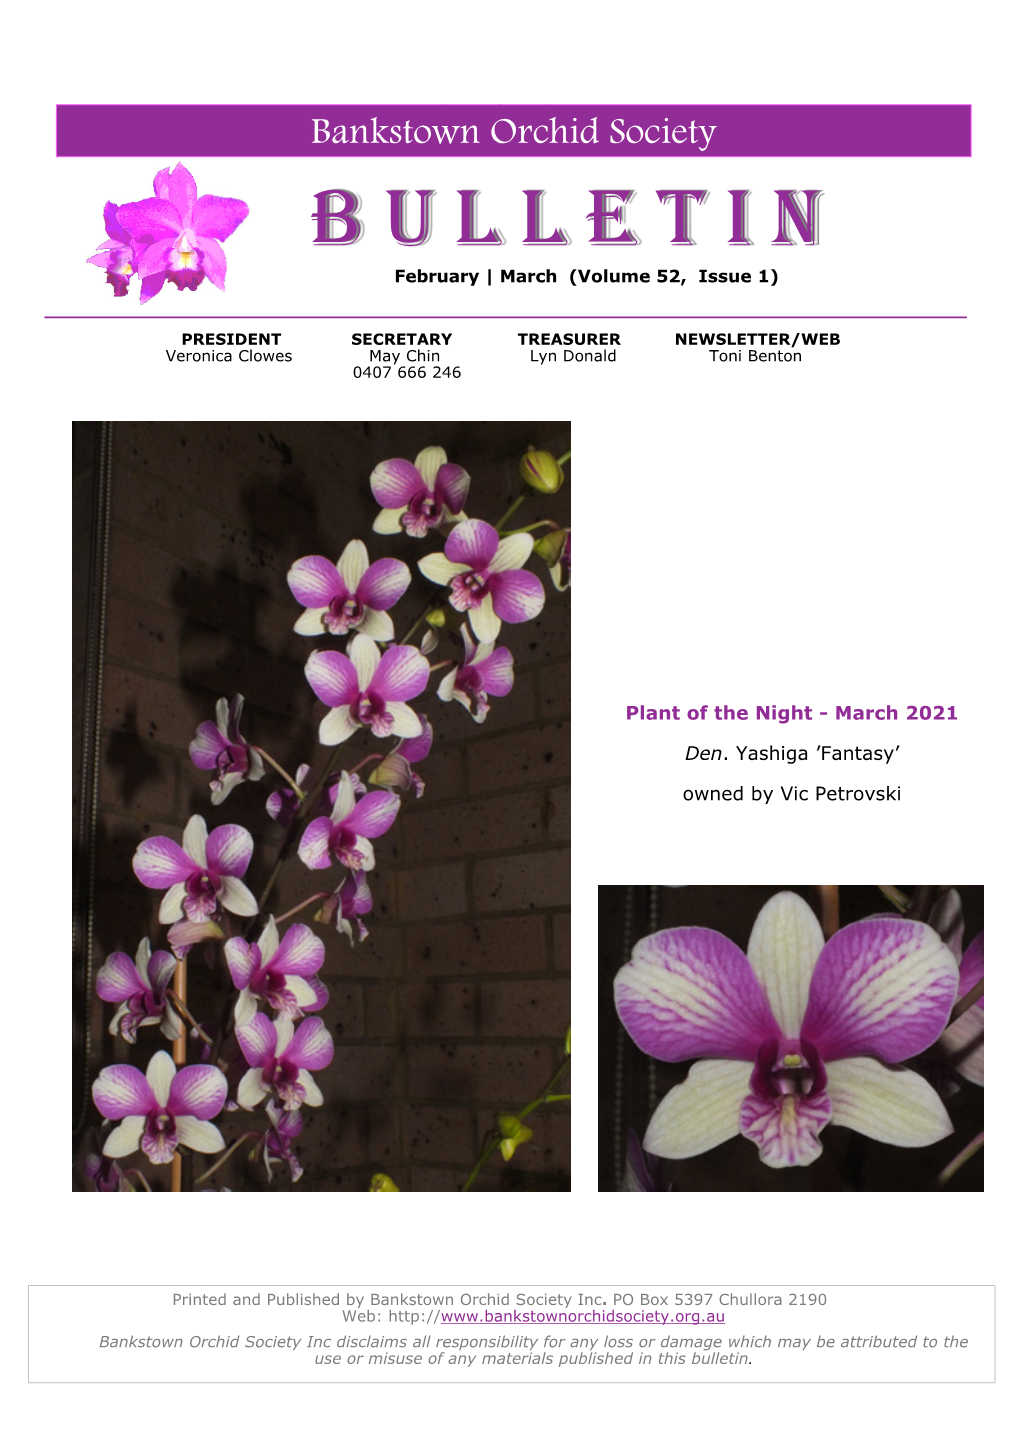 BULLETIN February | March (Volume 52, Issue 1)